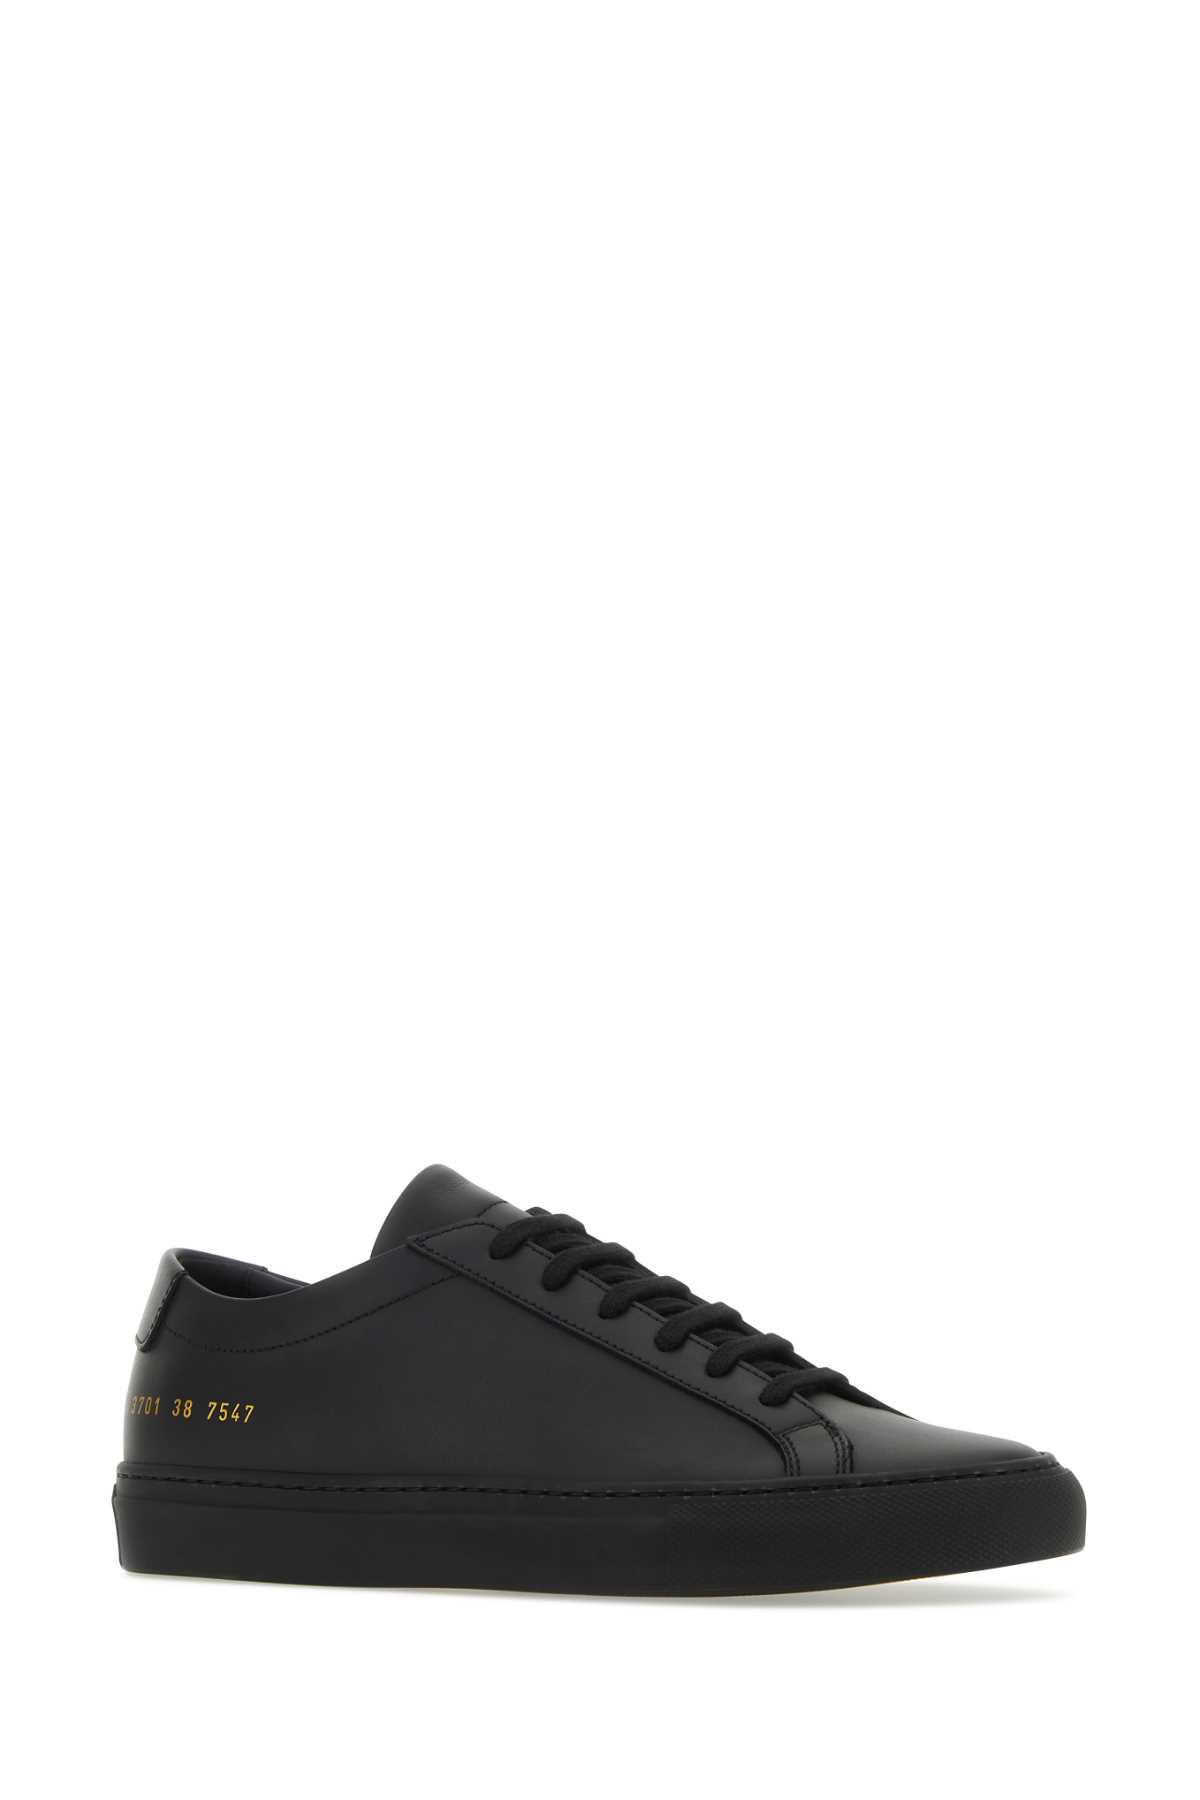 Common Projects Black Leather Original Achilles Trainers In 7547